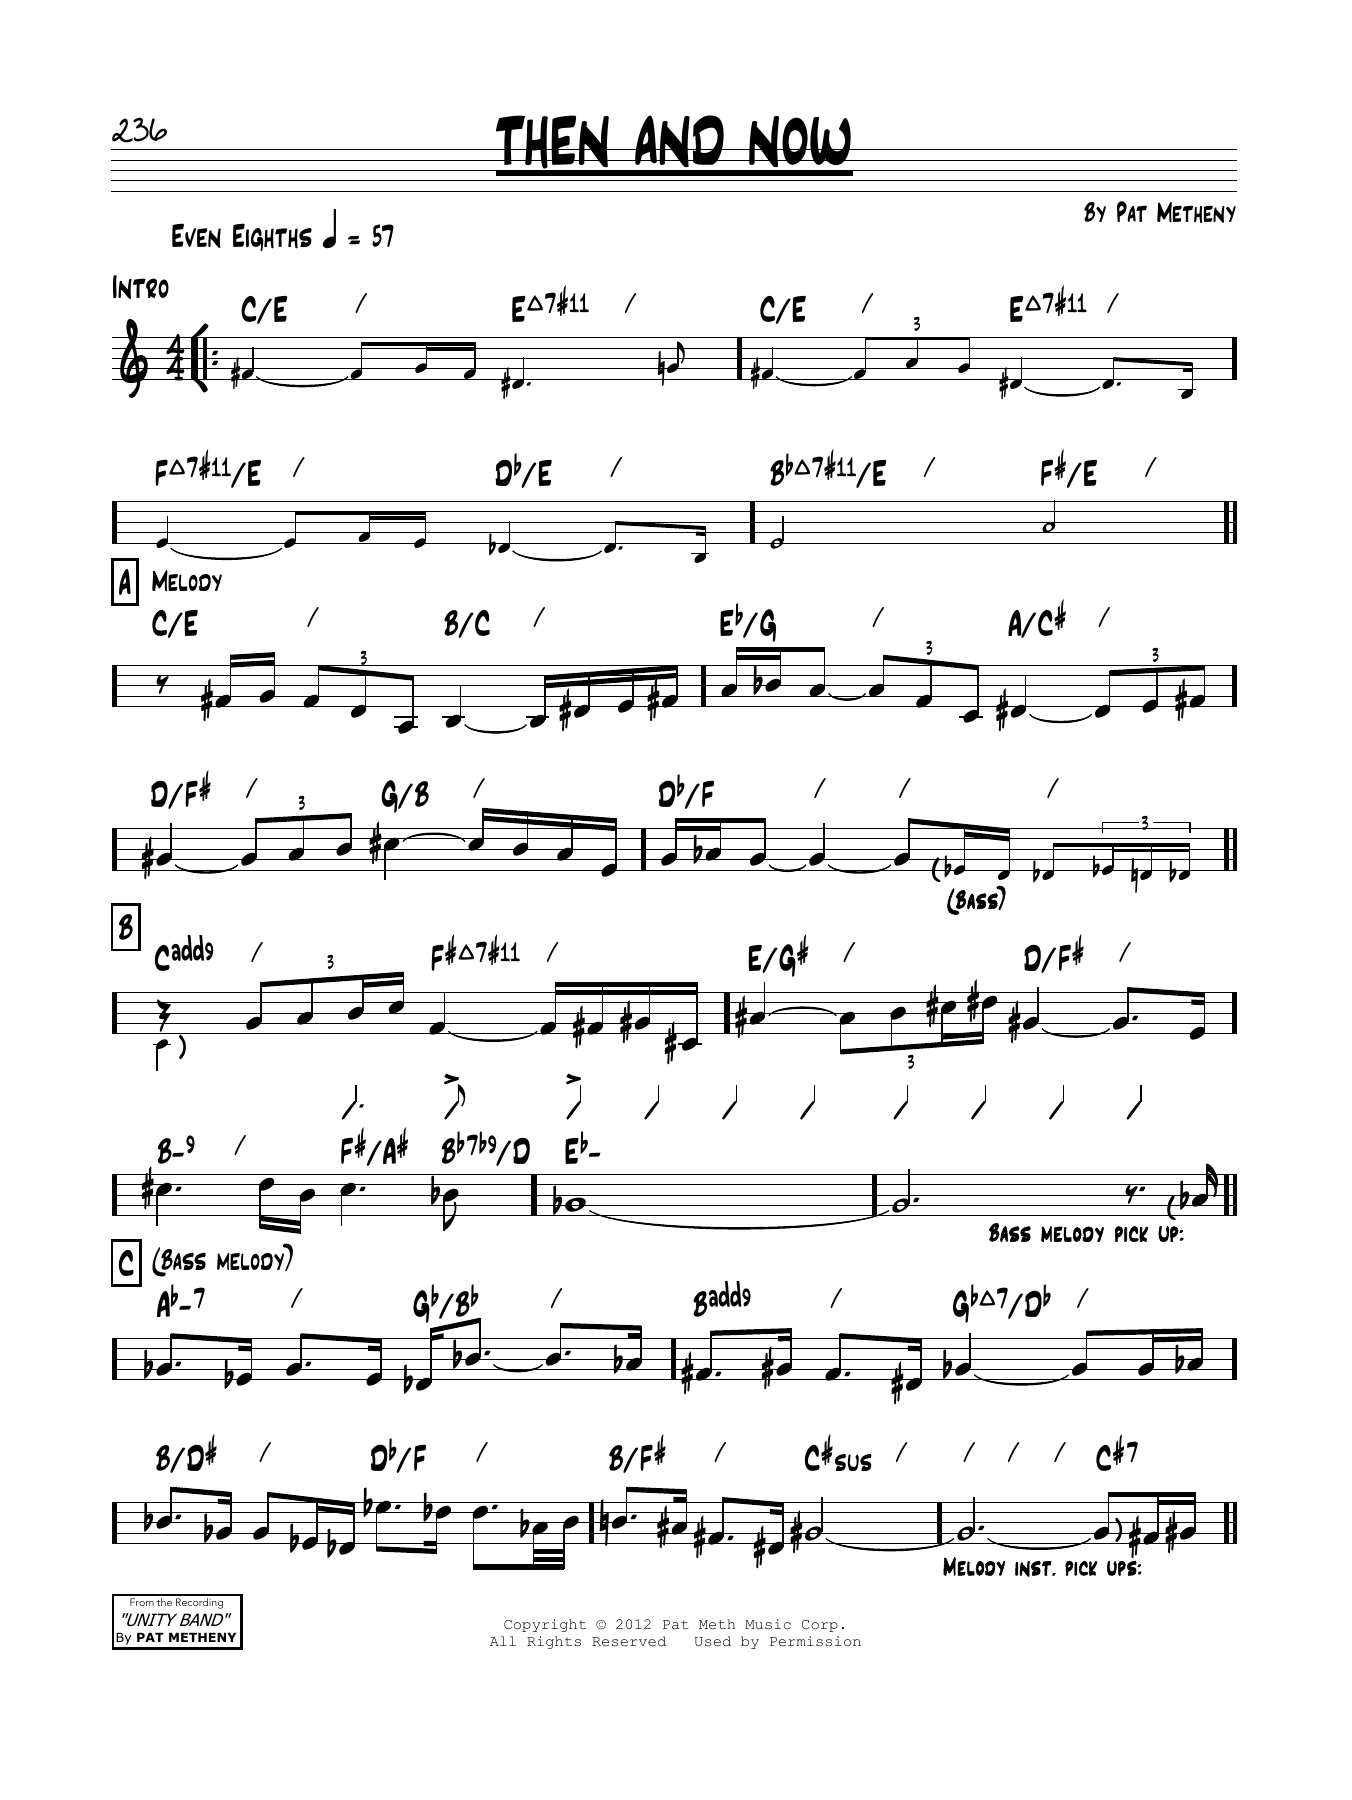 Download Pat Metheny Then And Now Sheet Music